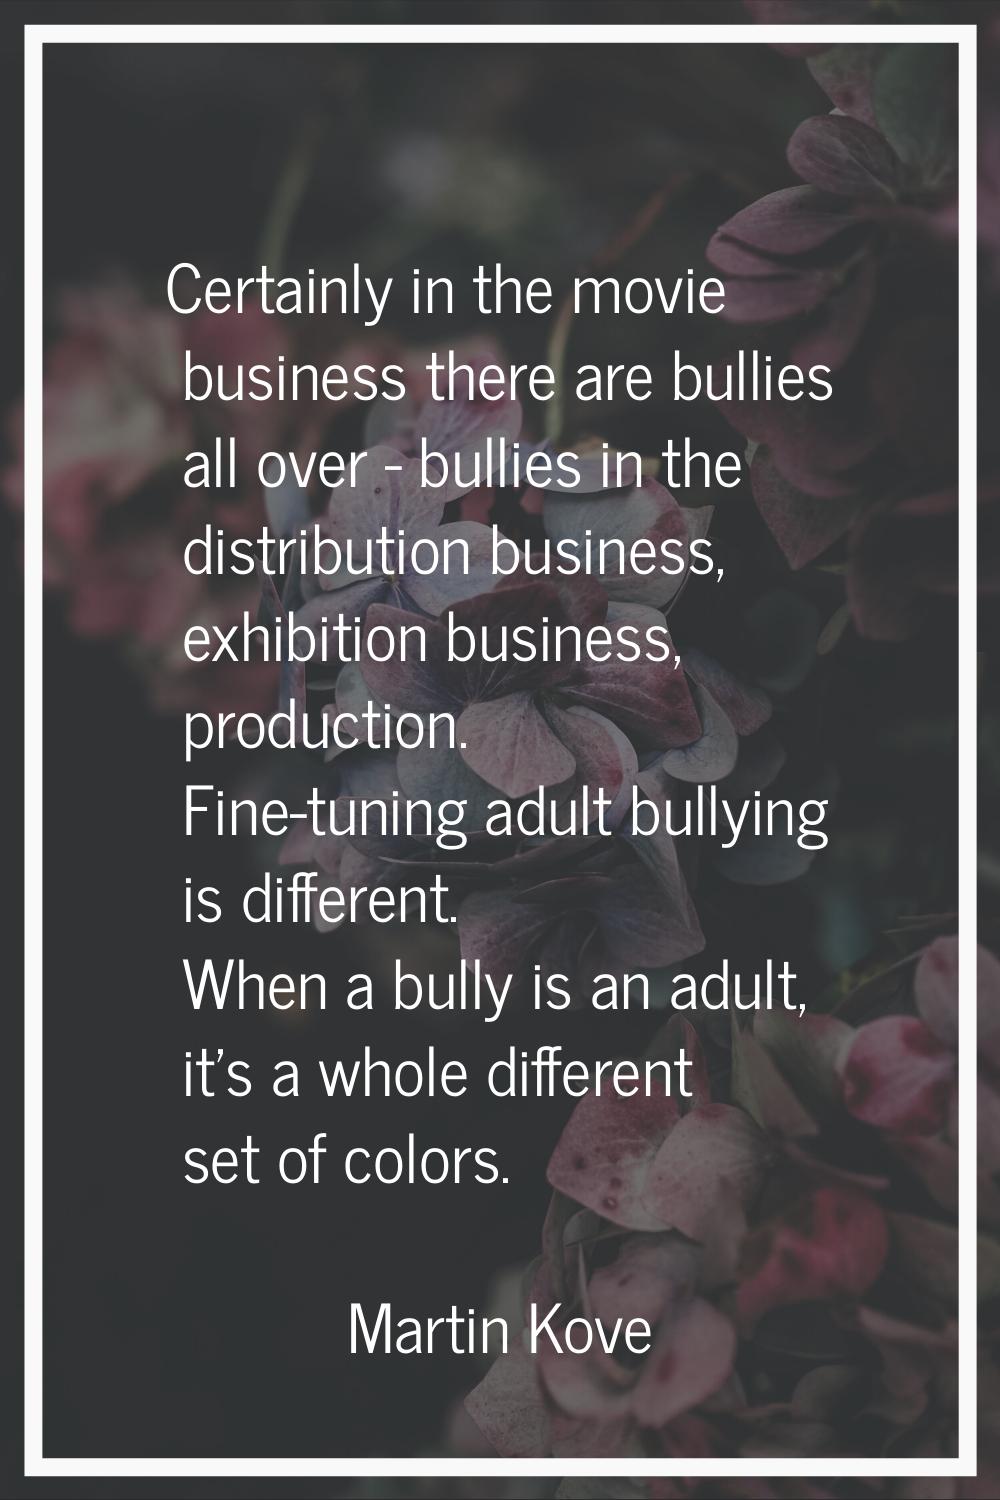 Certainly in the movie business there are bullies all over - bullies in the distribution business, 